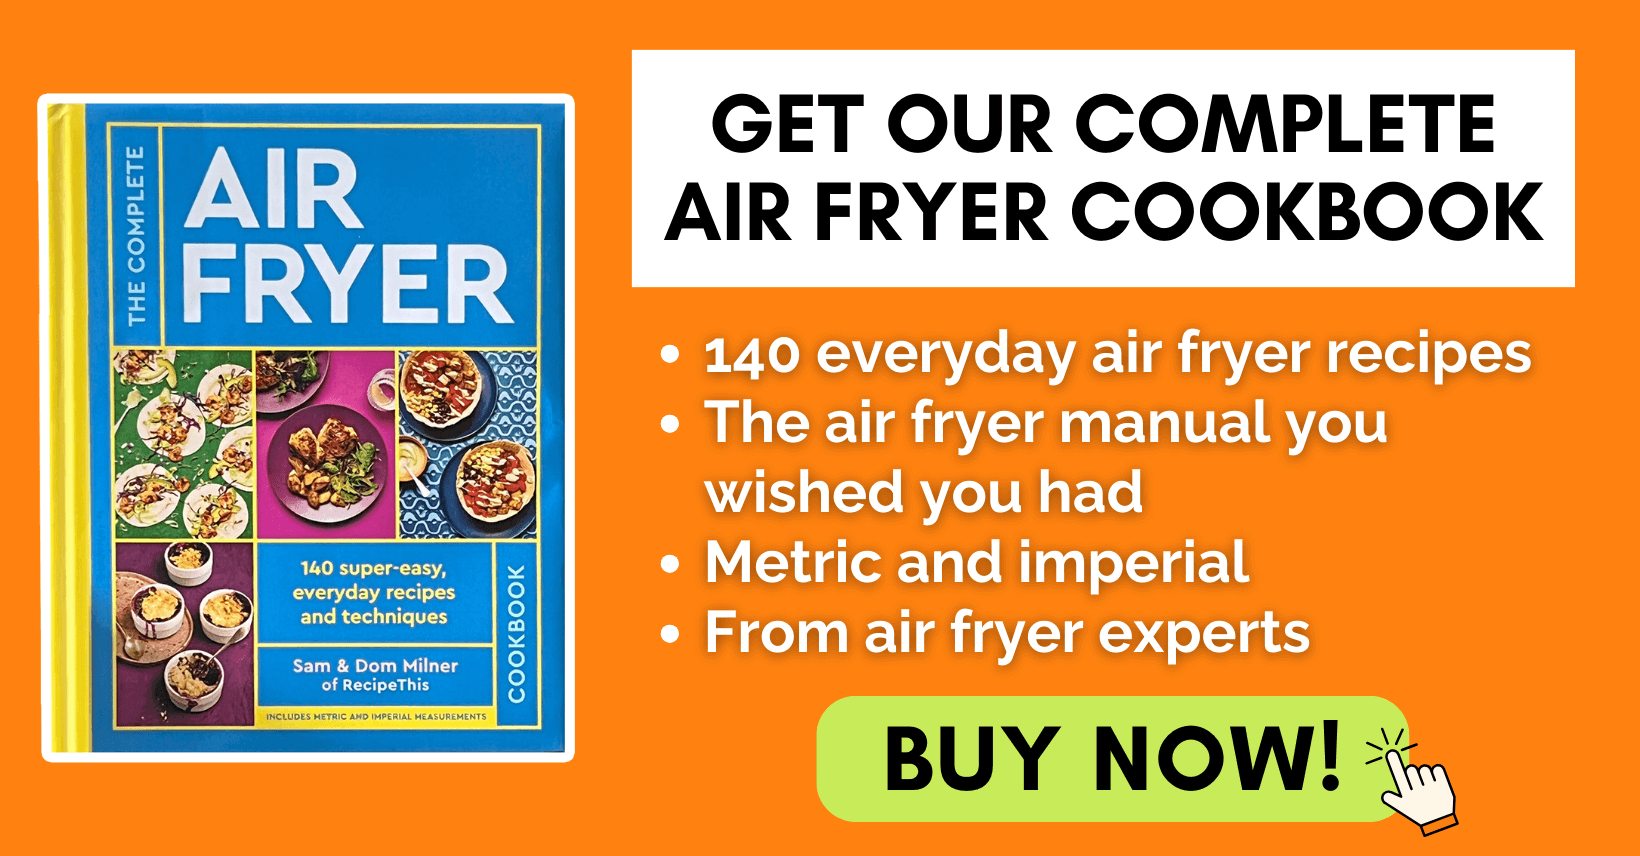 buy our own complete air fryer cookbook